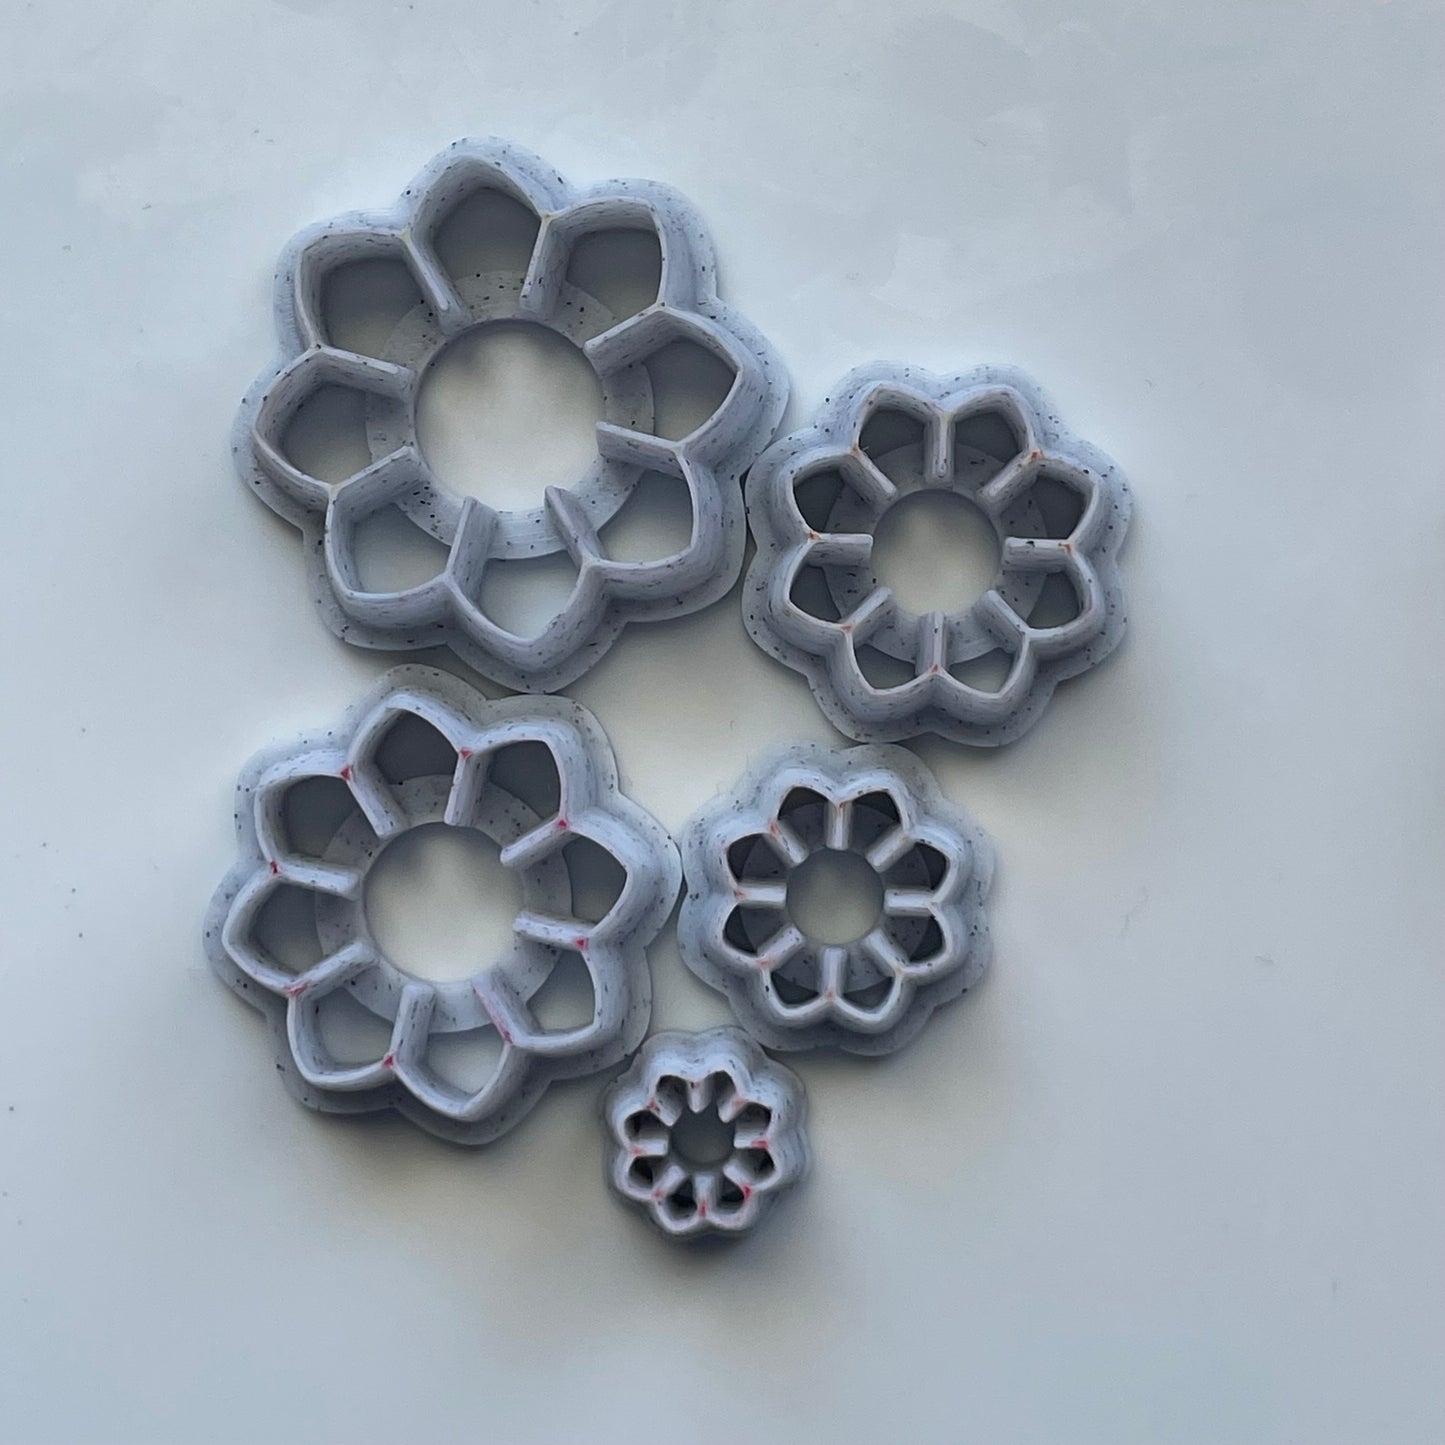 Layered flowers cutter set - made for use with polymer clay